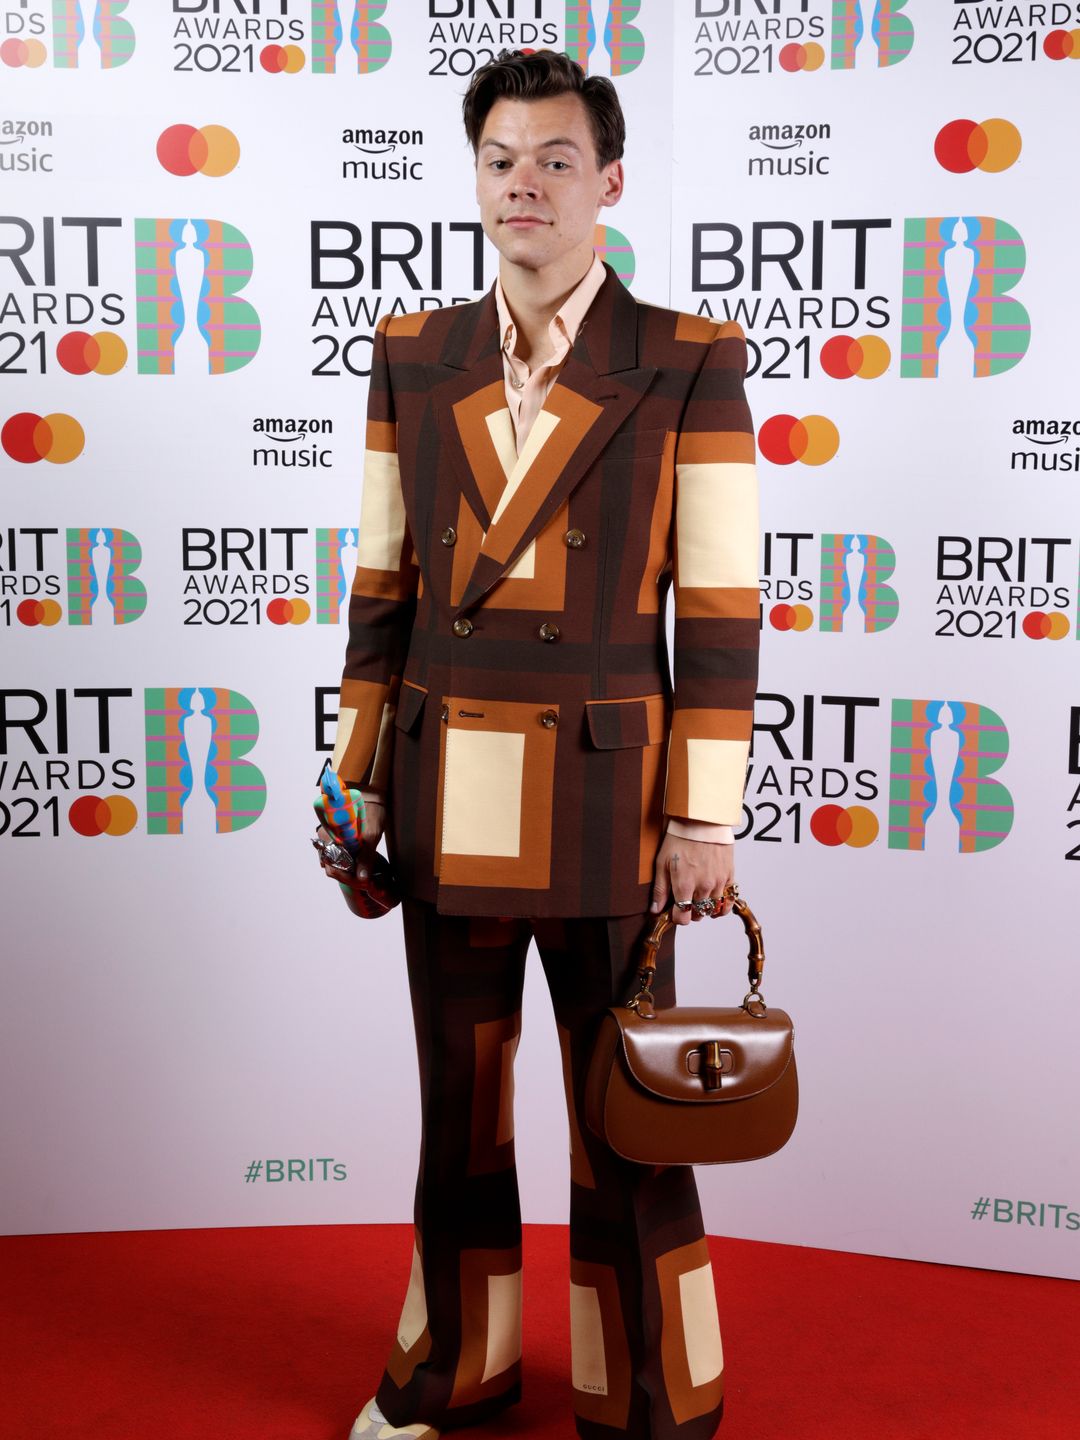 Harry Styles wins the Mastercard British Single award for Watermelon Sugar during The BRIT Awards 2021. He wears a brown Gucci suit with a brown leather handbag on the redcarpet